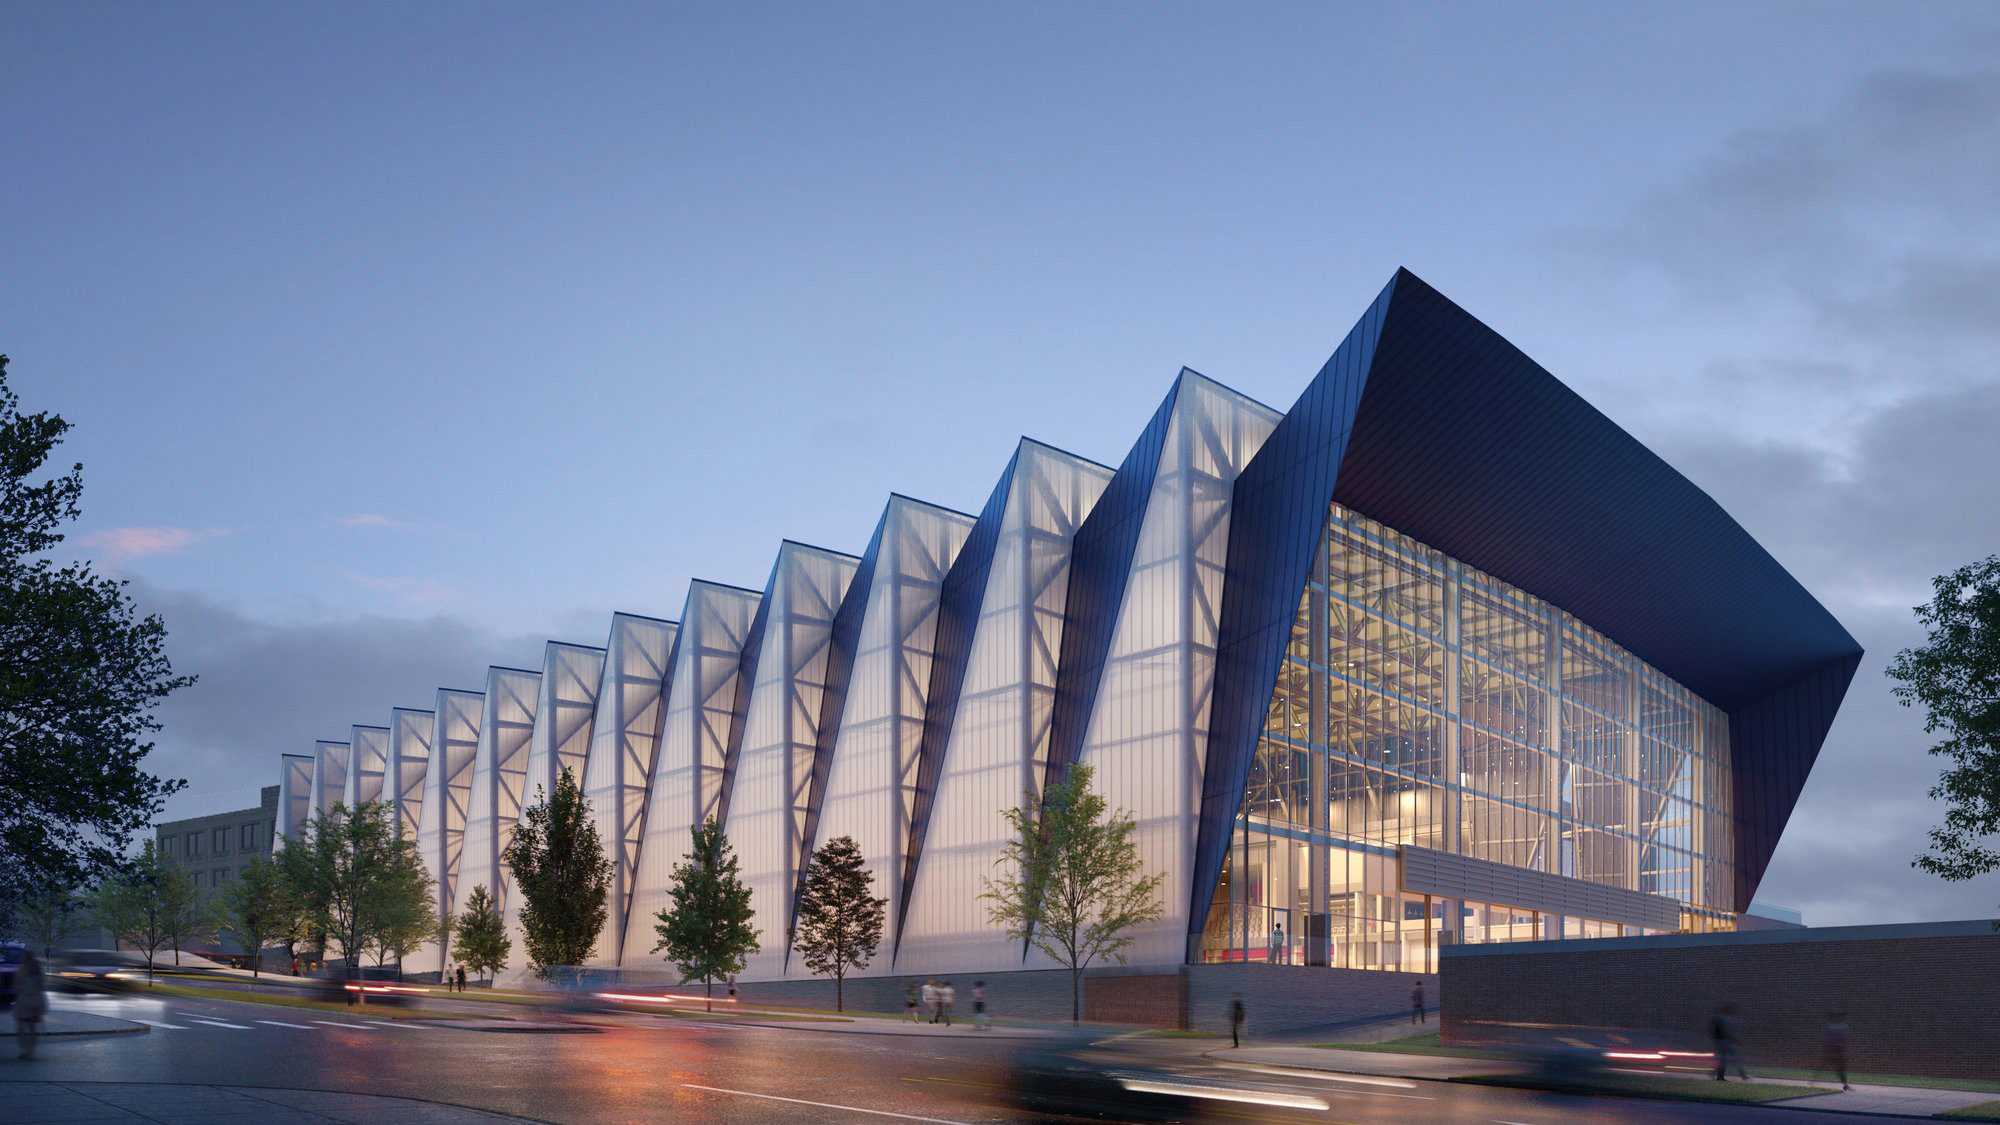 New England Sports Village - Steel Building arena in the USA